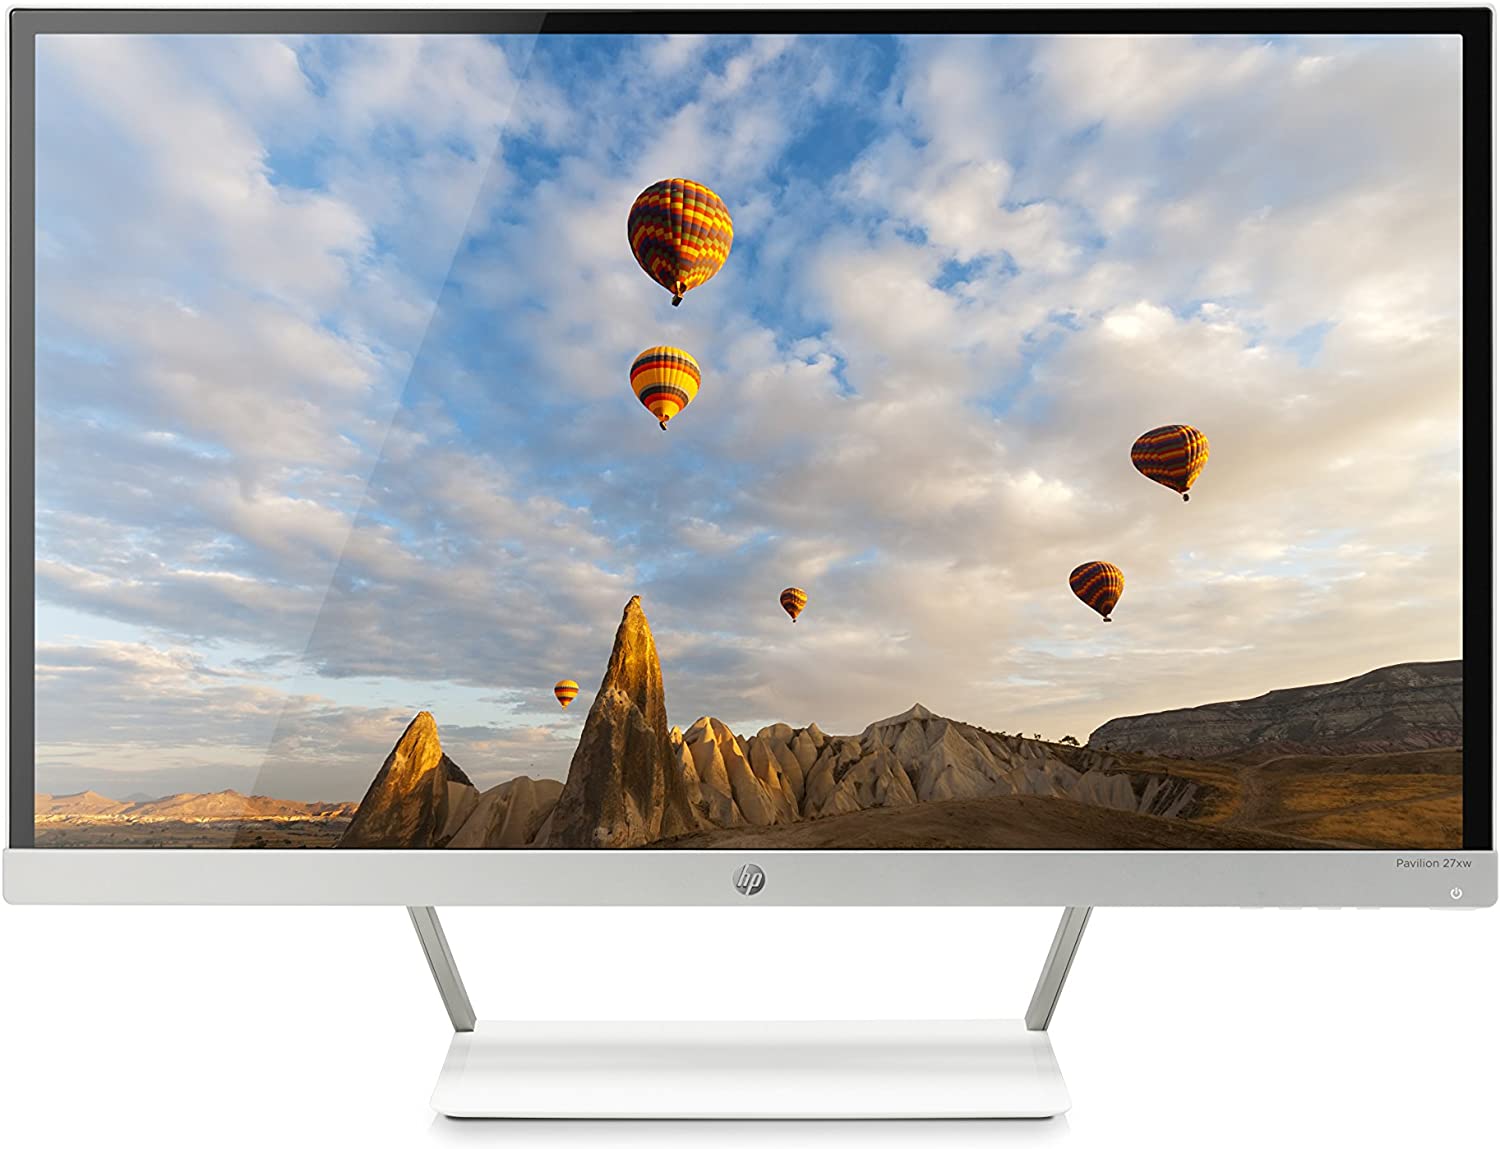 Review of HP Pavilion 27xw 27-Inch Full HD 1080p IPS LED Monitor (V0N26AA#ABA)